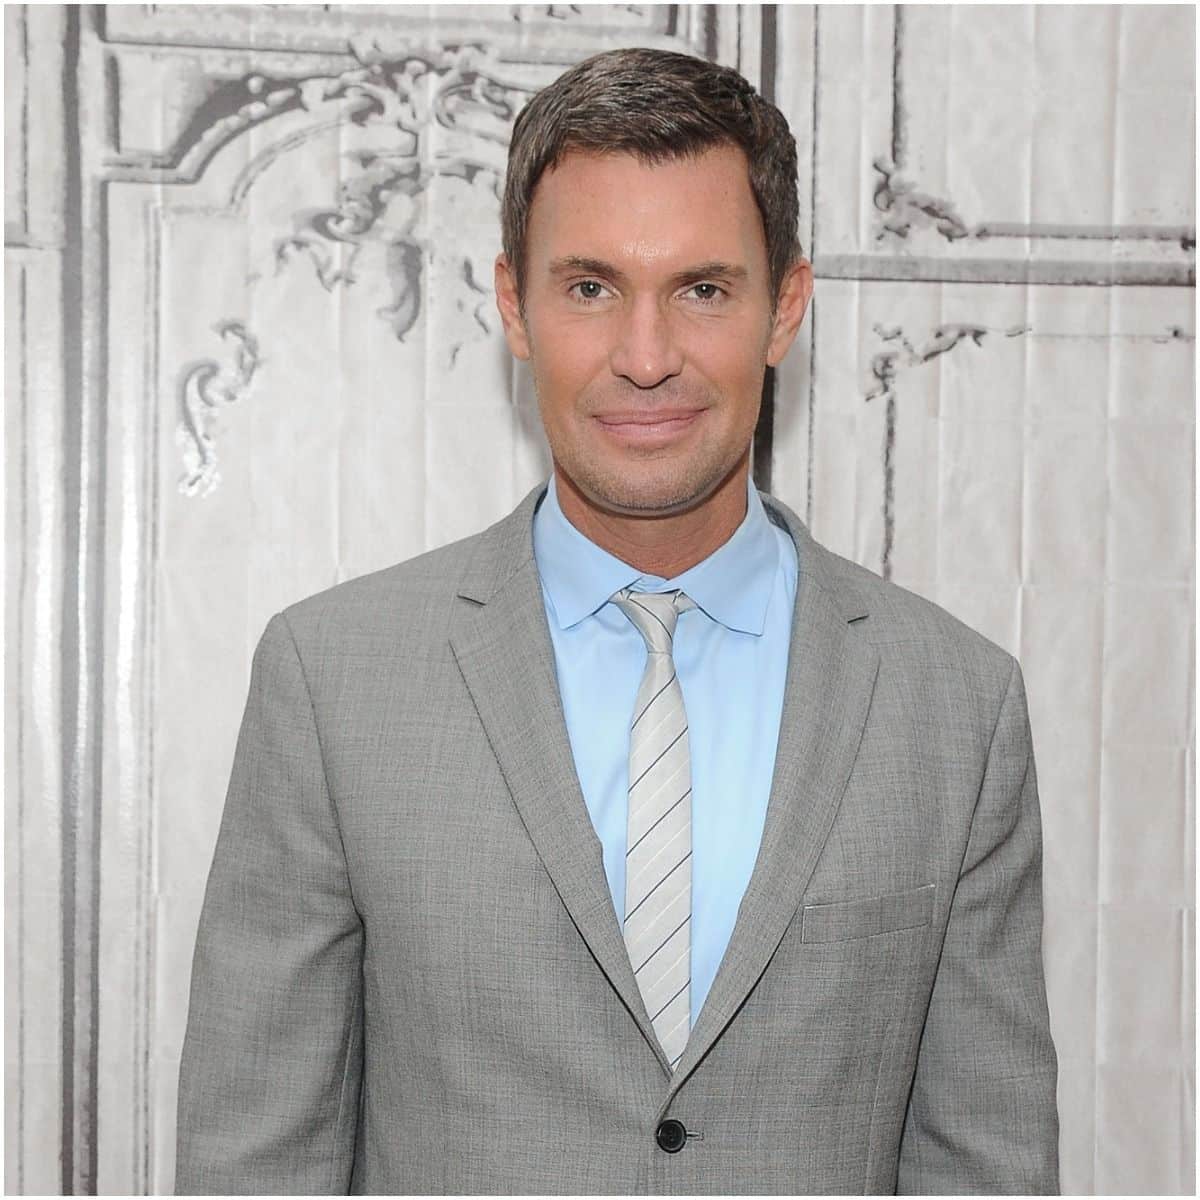 Jeff Lewis Net Worth 2022 - Famous People Today